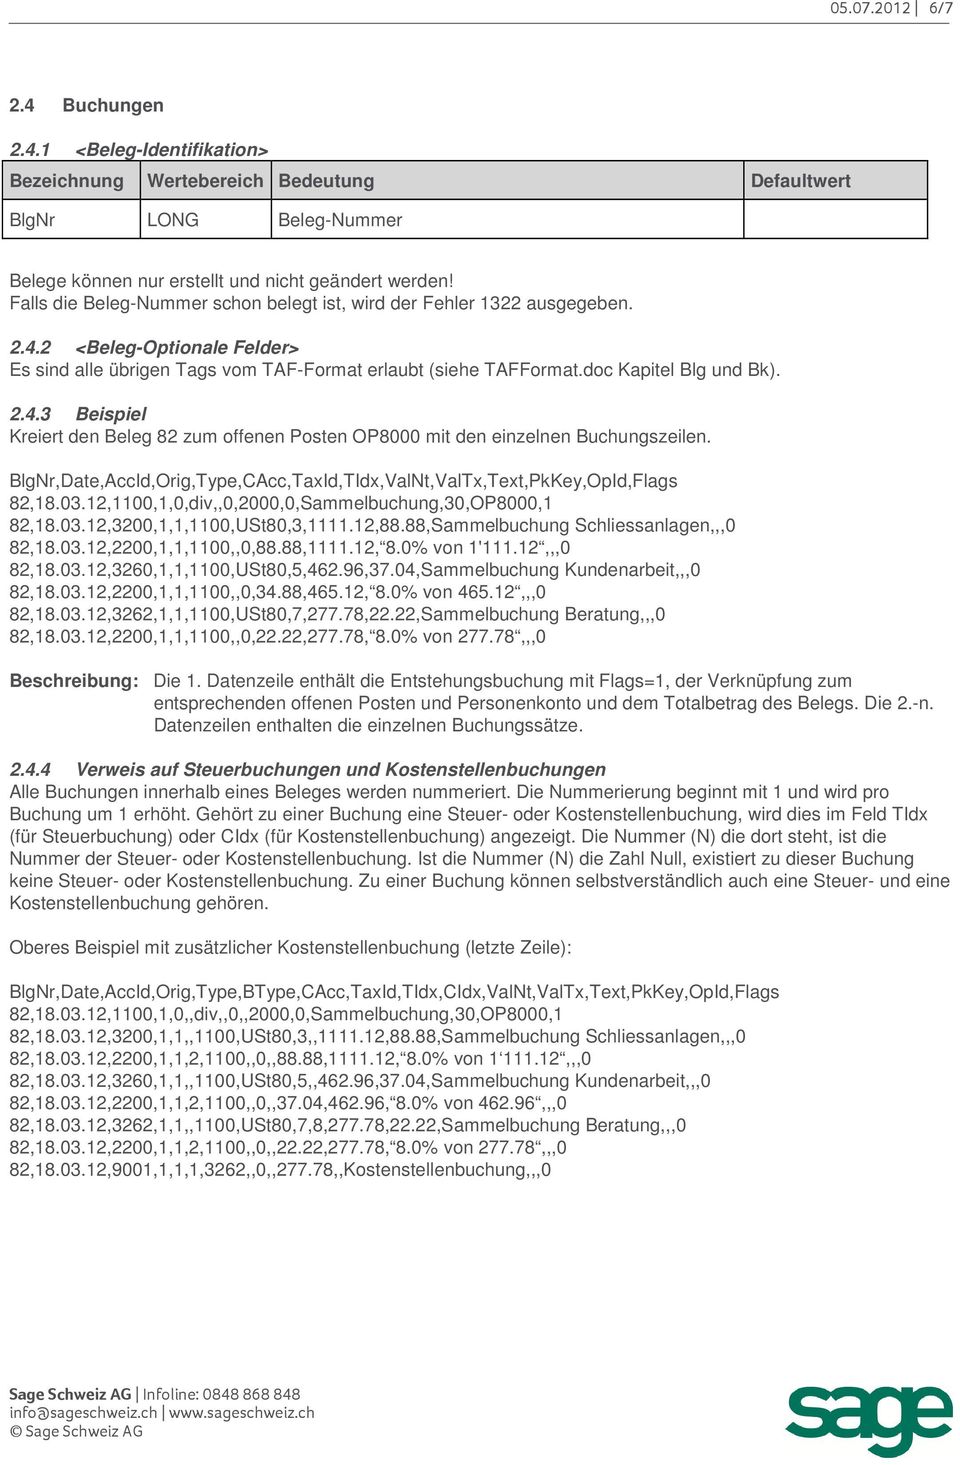 BlgNr,Date,AccId,Orig,Type,CAcc,TaxId,TIdx,ValNt,ValTx,Text,PkKey,OpId,Flags 82,18.03.12,1100,1,0,div,,0,2000,0,Sammelbuchung,30,OP8000,1 82,18.03.12,3200,1,1,1100,USt80,3,1111.12,88.